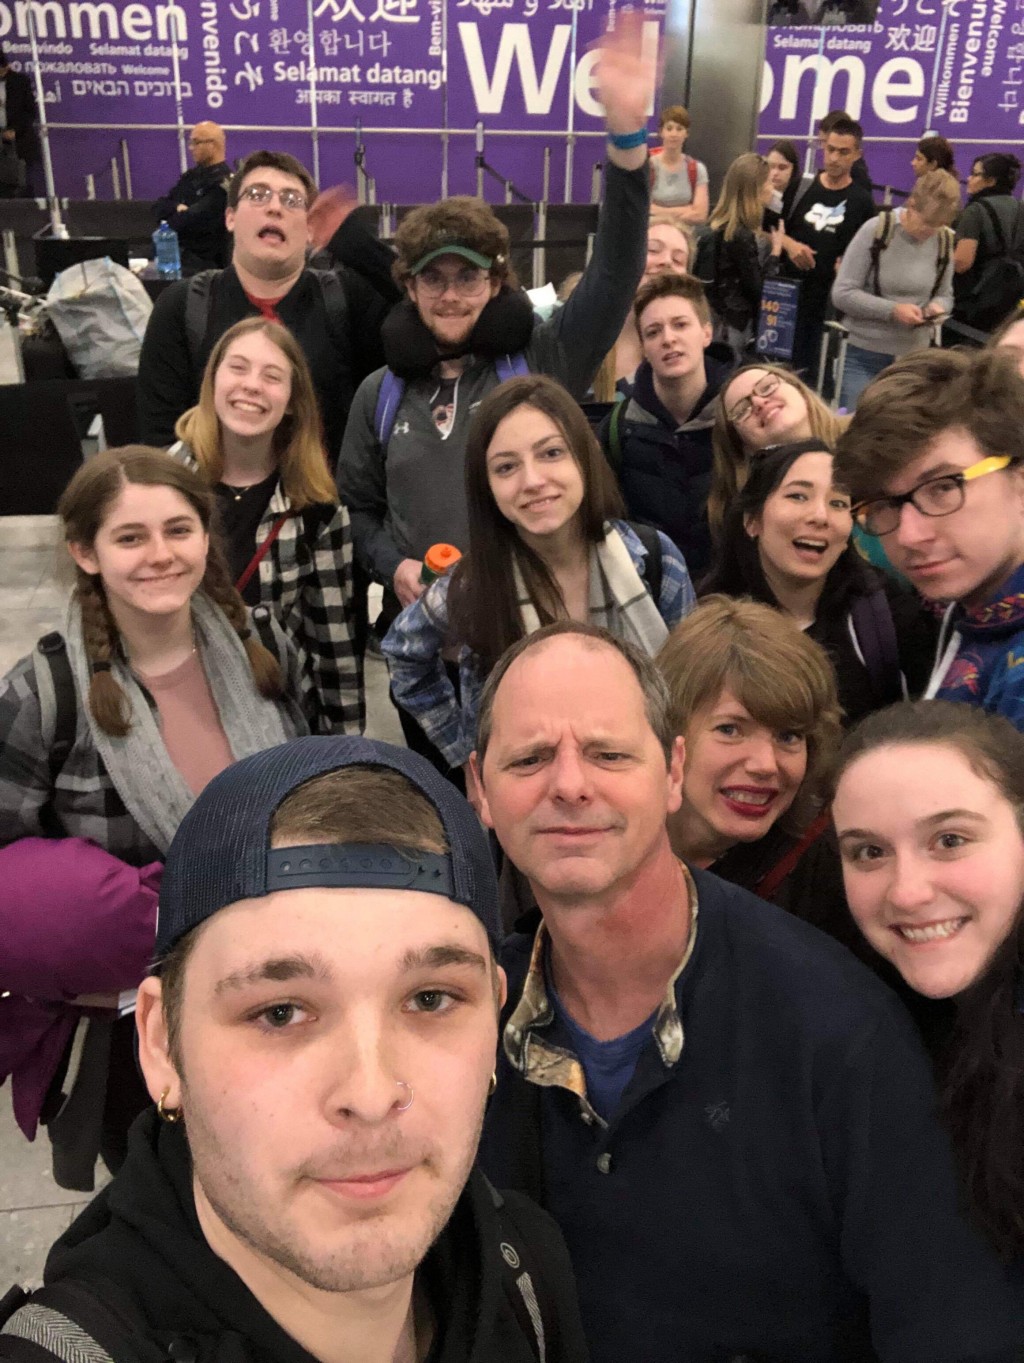 Theater students invade London